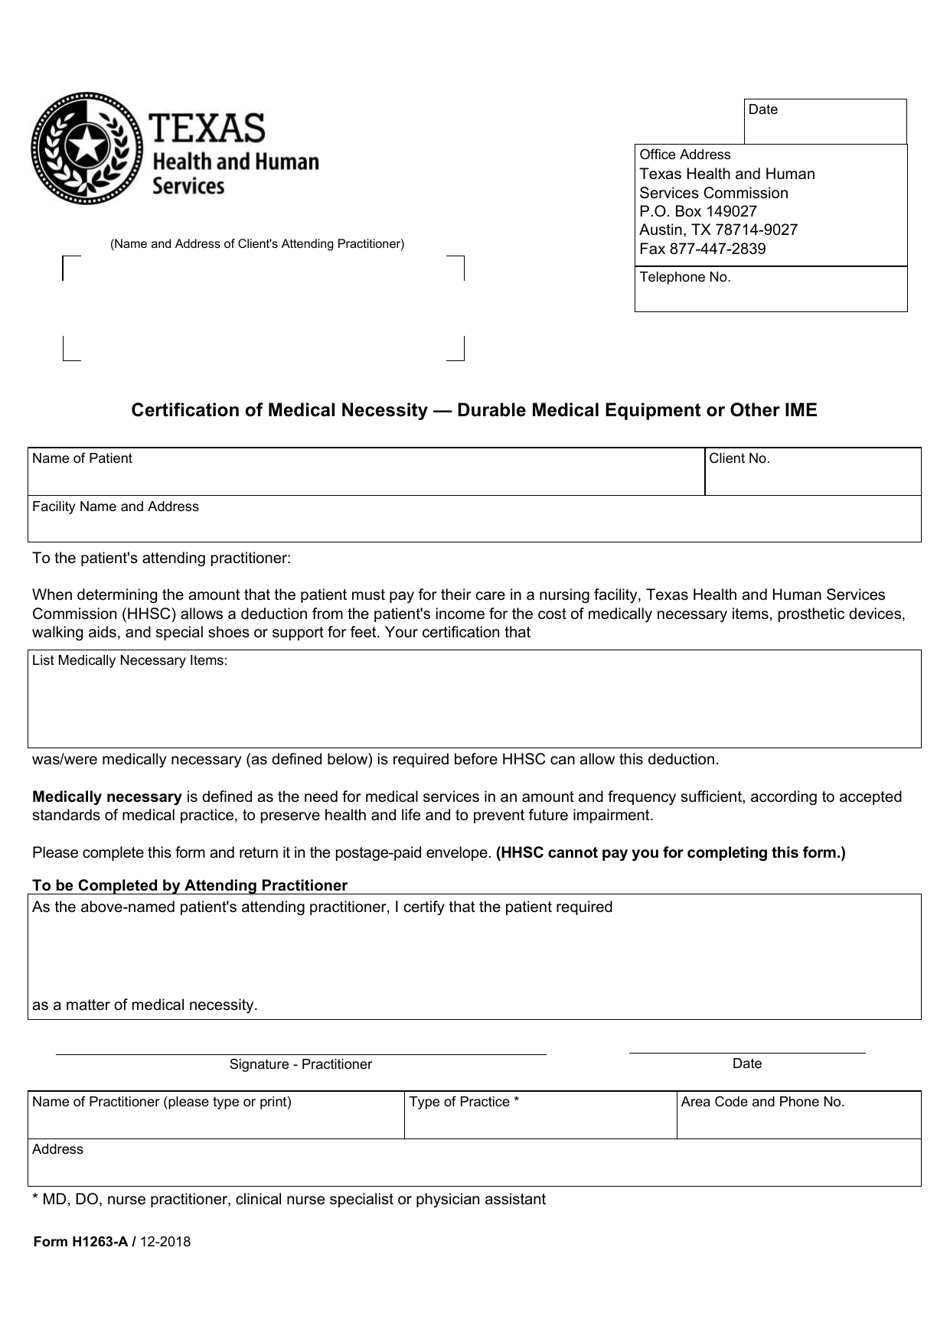 Form H1263-A Certification of Medical Necessity - Durable Medical Equipment or Other Ime - Texas, Page 1